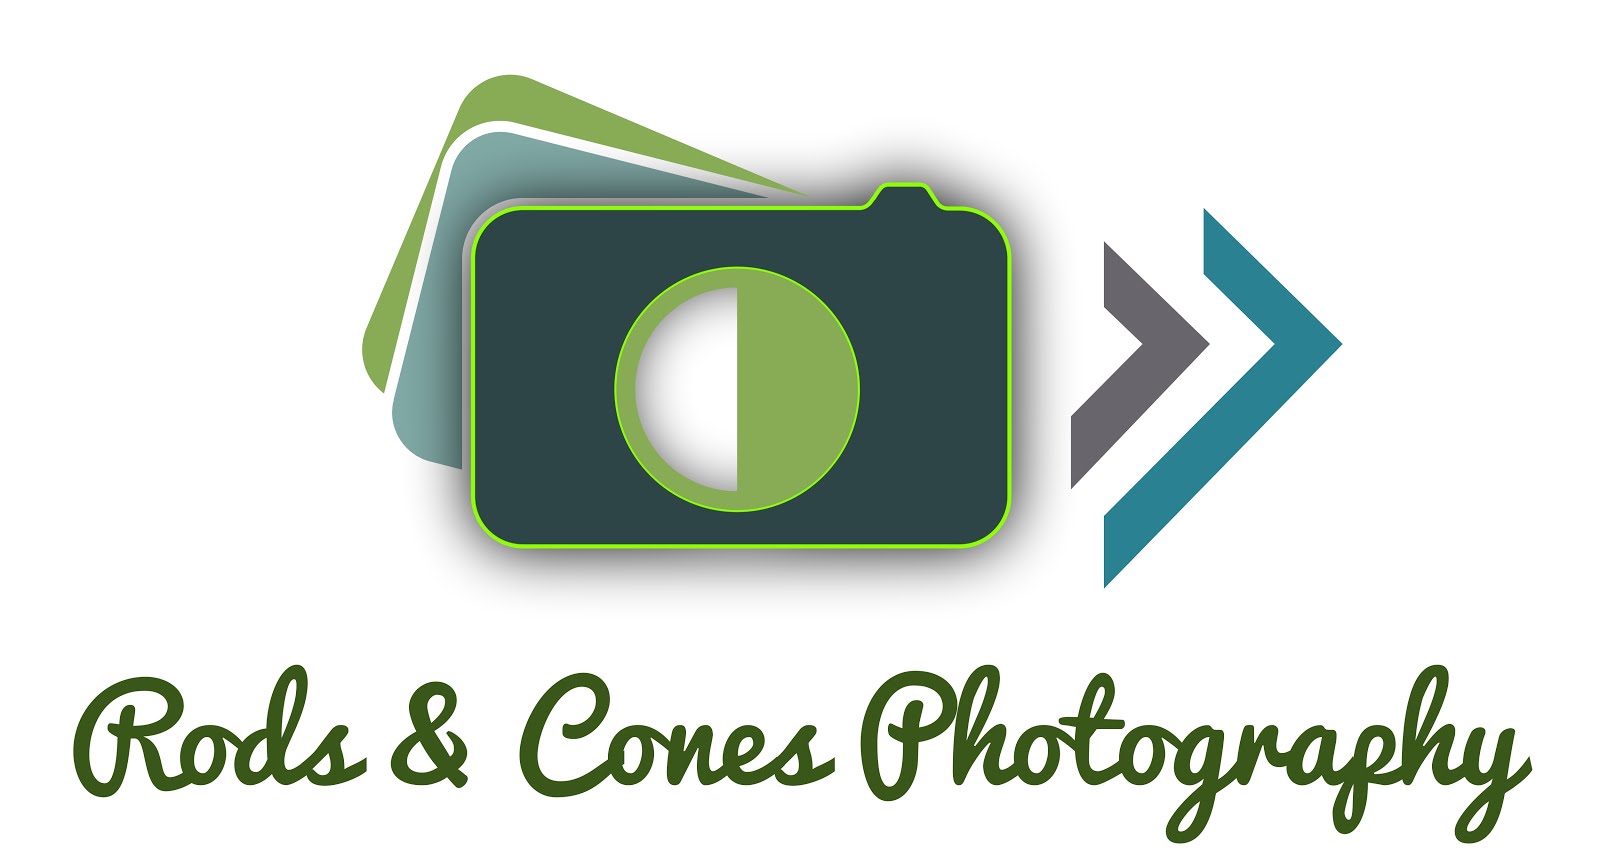 AFFORDABLE PHOTOGRAPHY AND VIDEOGRAPHY SERVICES